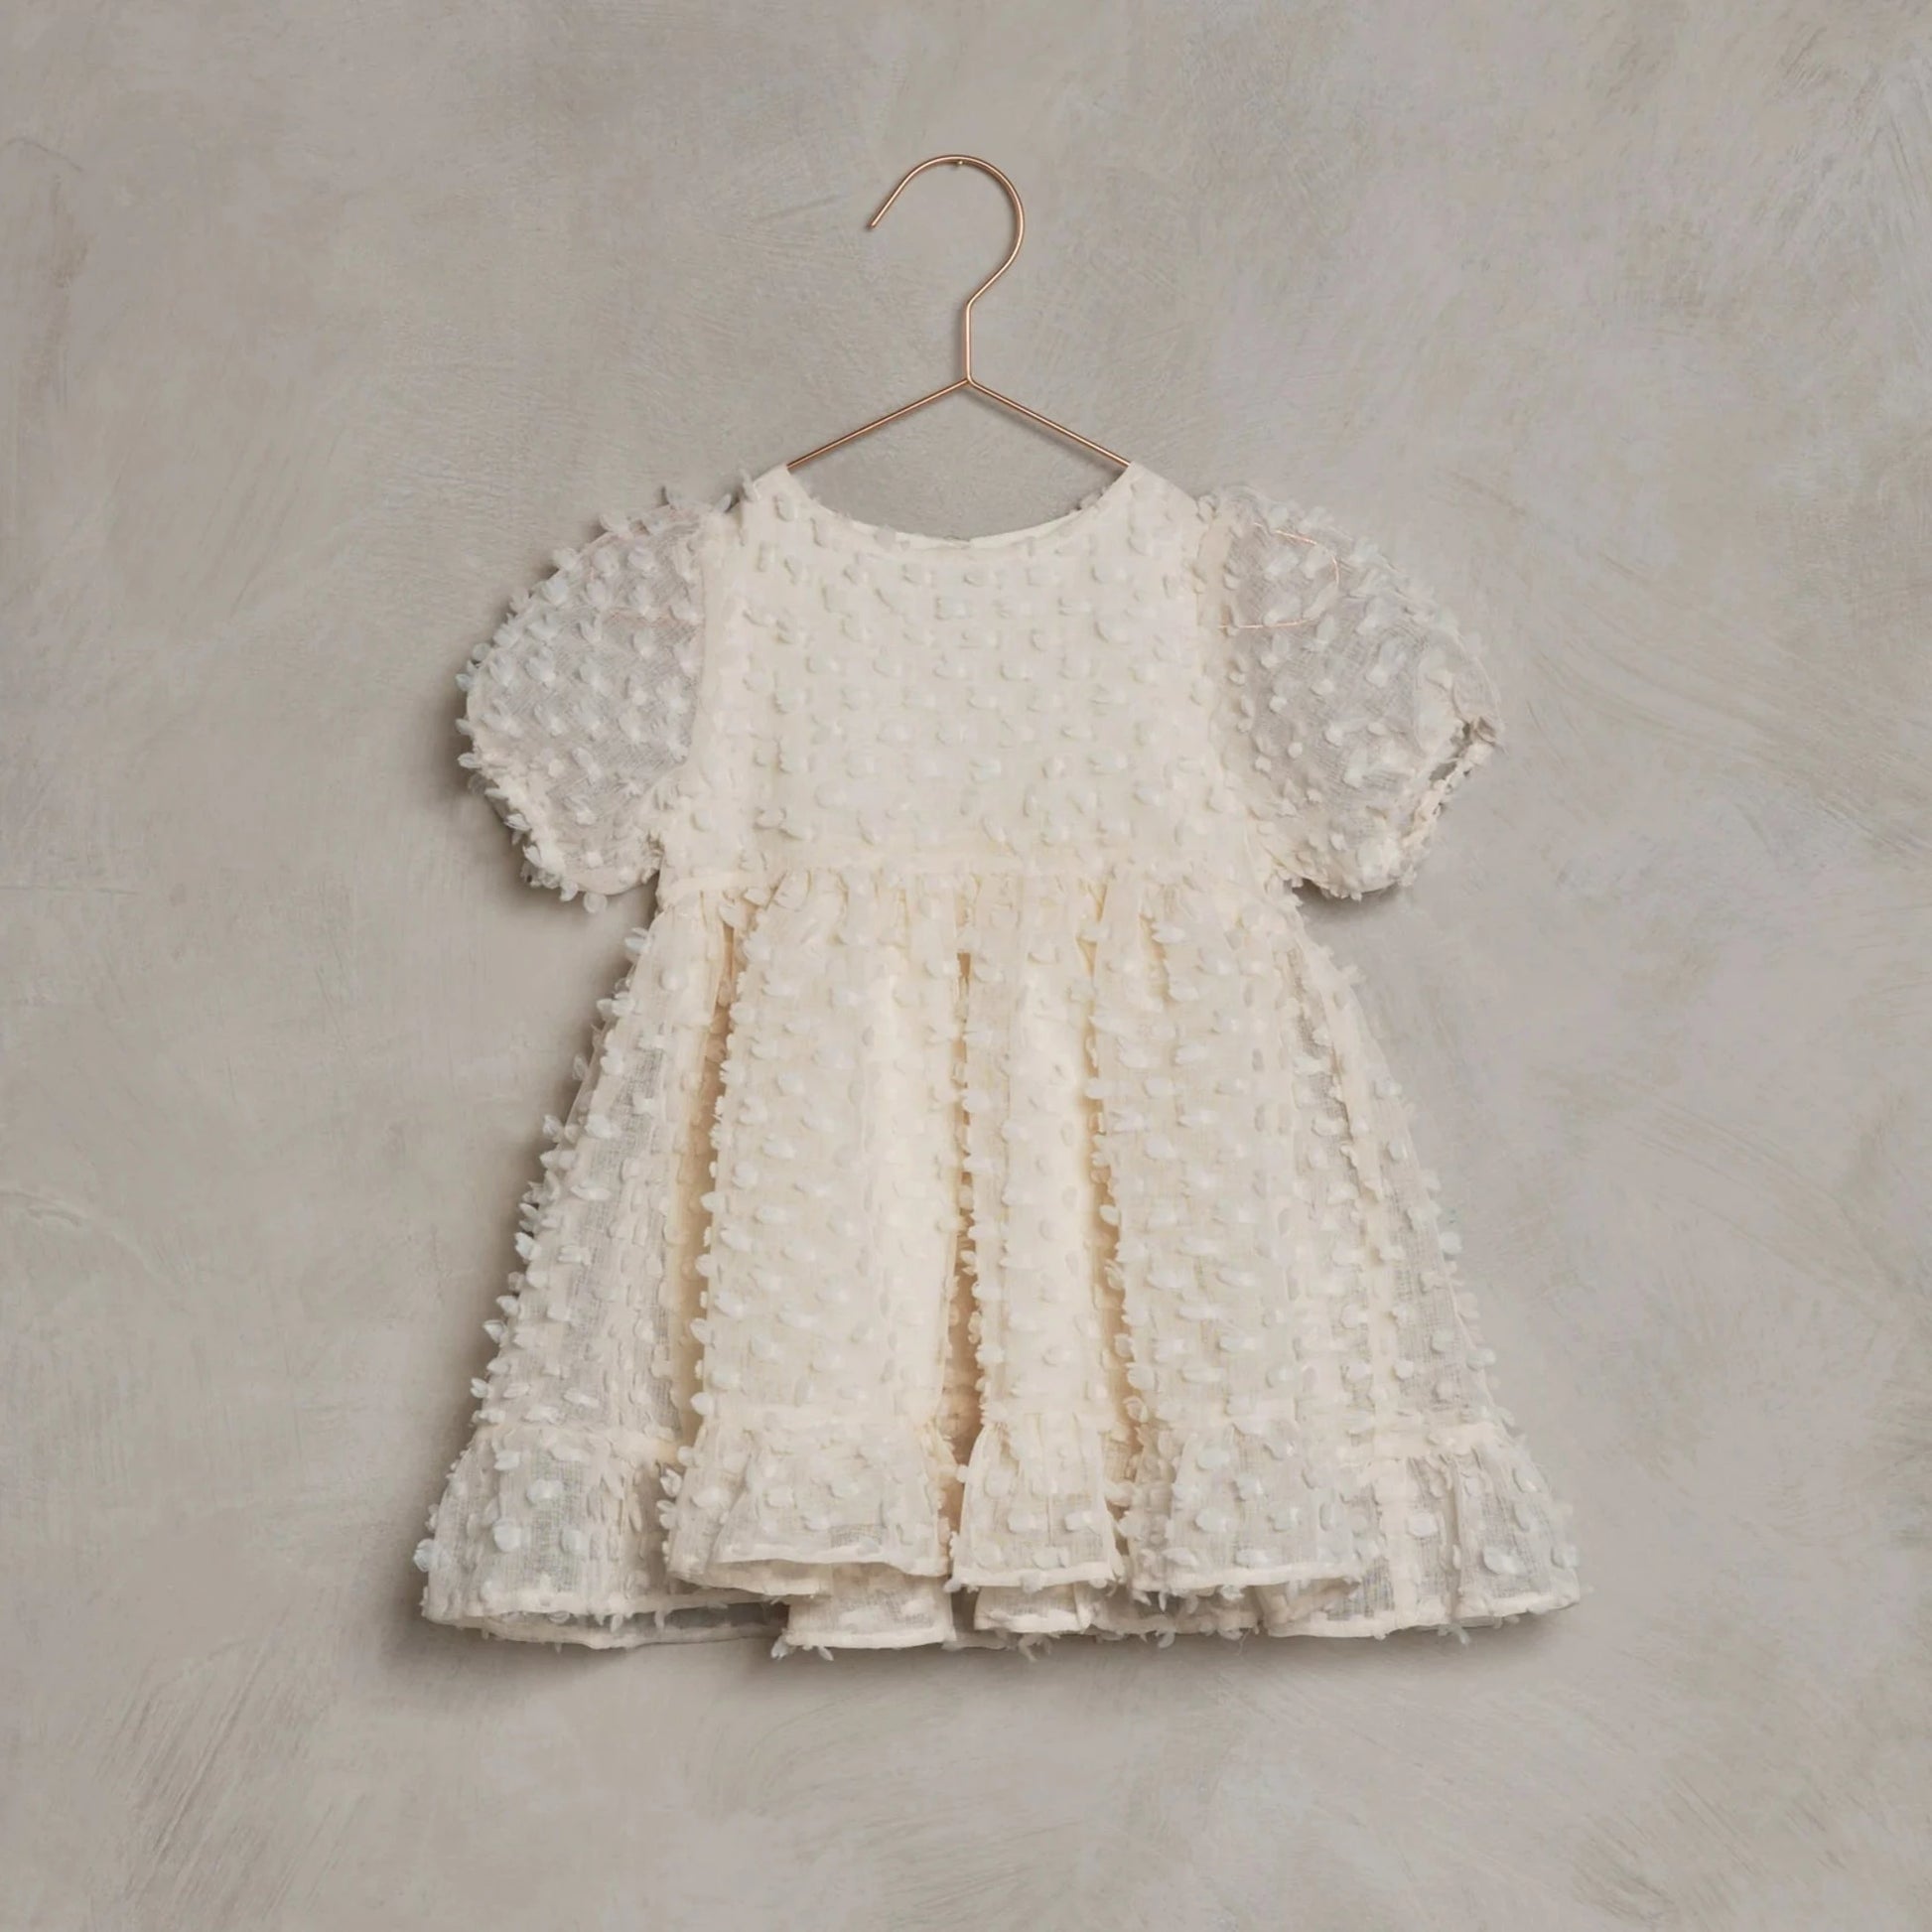 This adorable Noralee Quinn dress features pretty puff sleeves and a babydoll inspired silhouette. Scooped neck and button back closure.